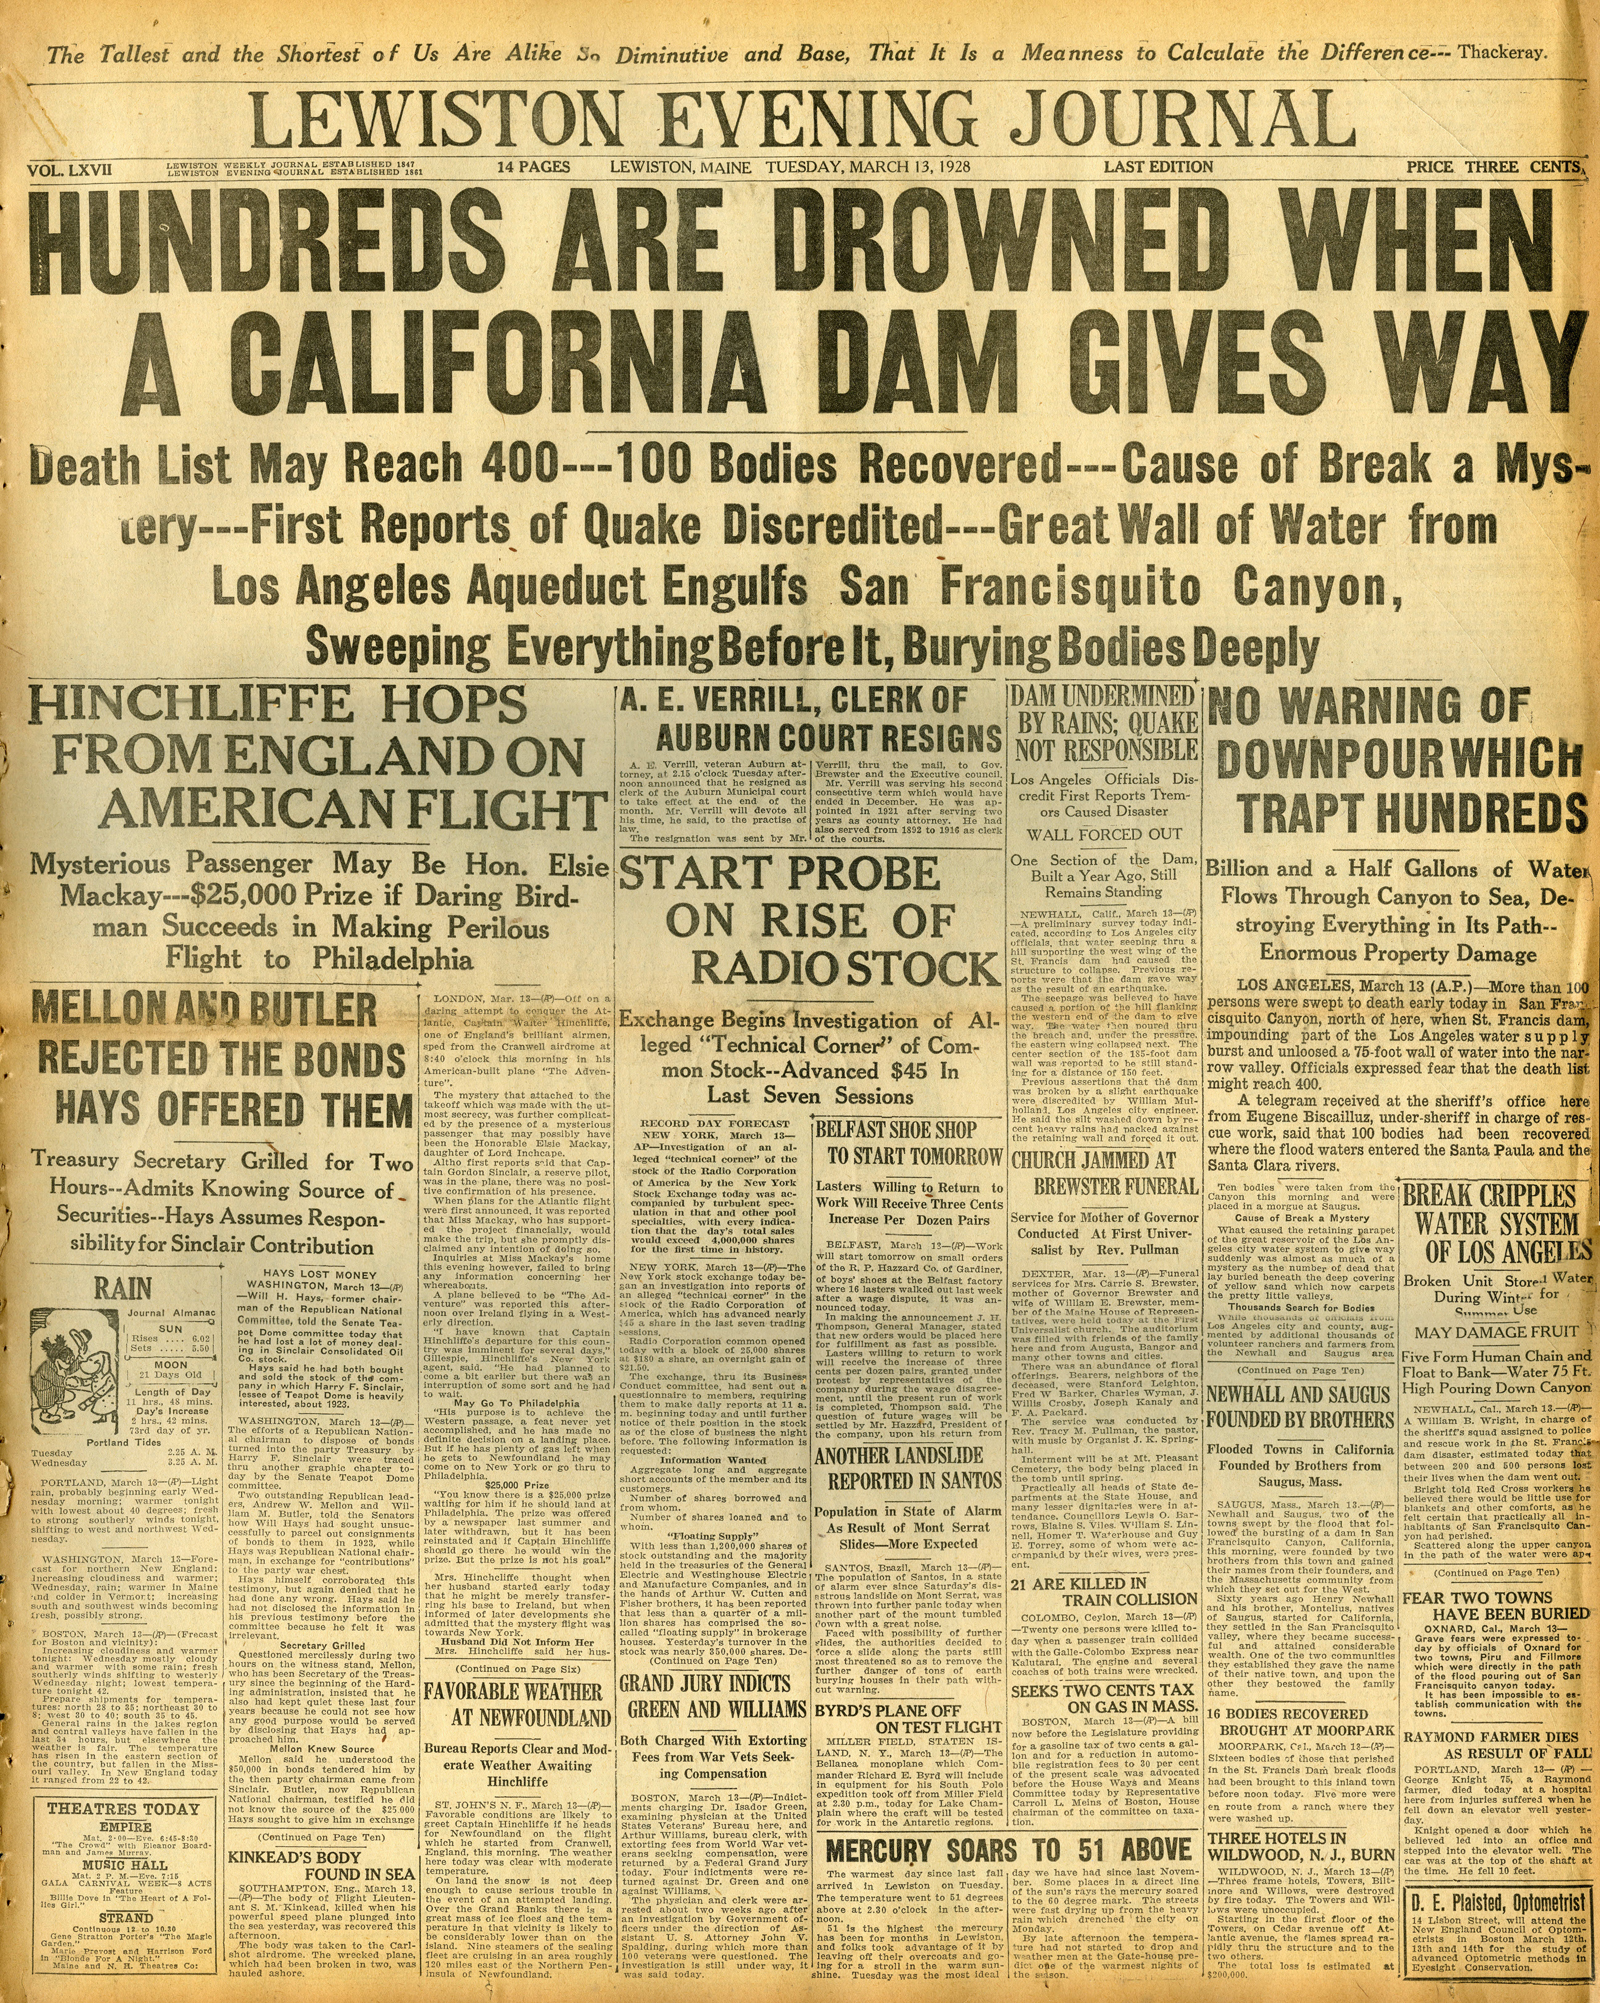 Newspapers of the St. Francis Dam Disaster.

LEWISTON EVENING JOURNAL(NEWSPAPER),

TUESDAY, MARCH 13, 1928